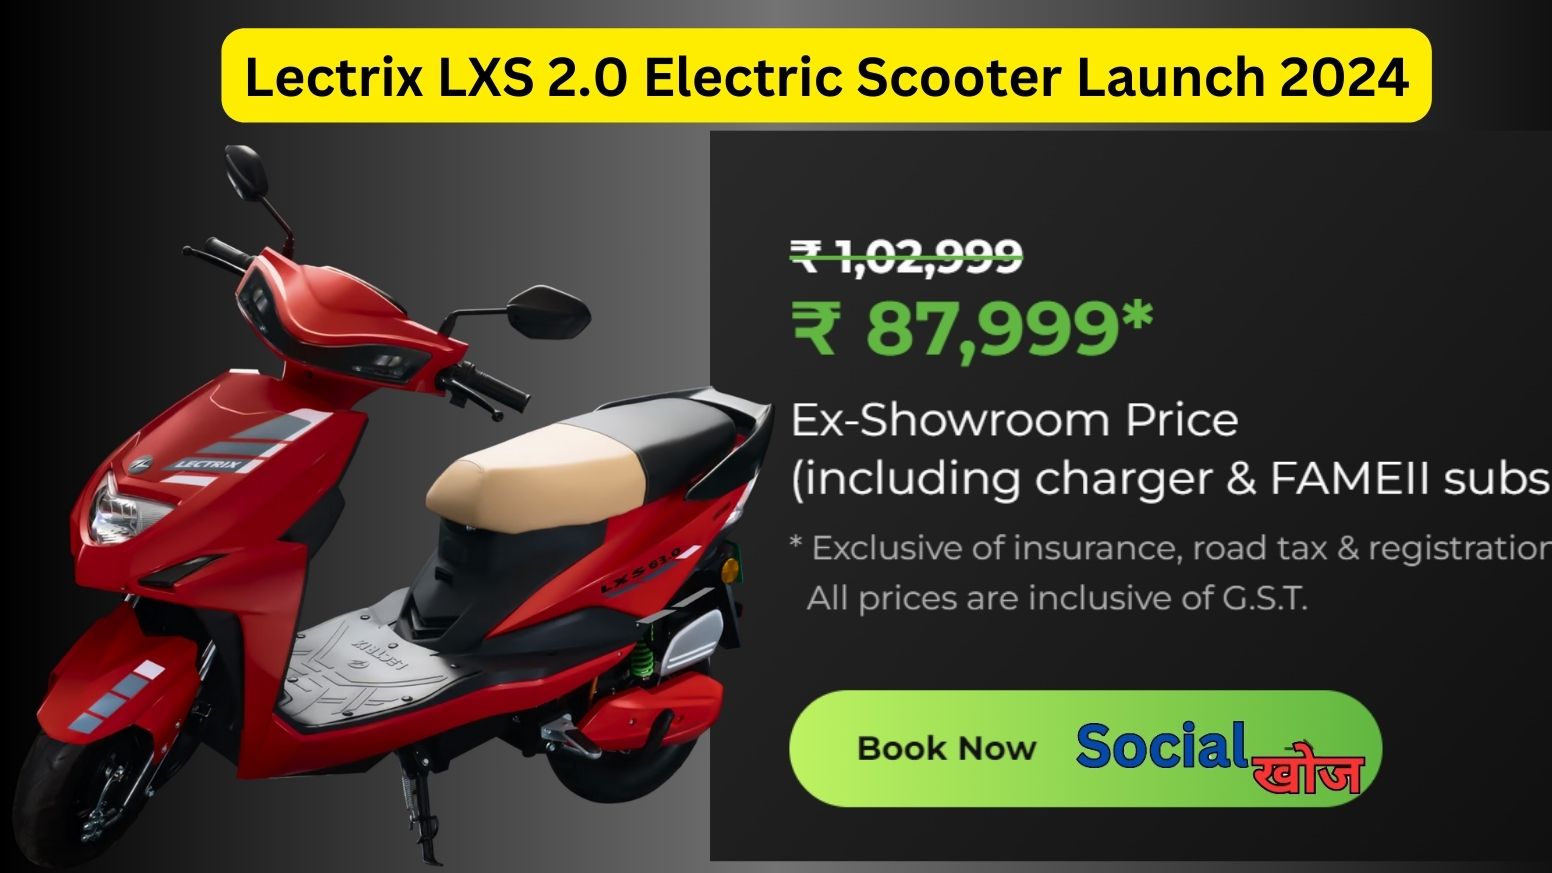 Lectrix LXS 2.0 electric scooter